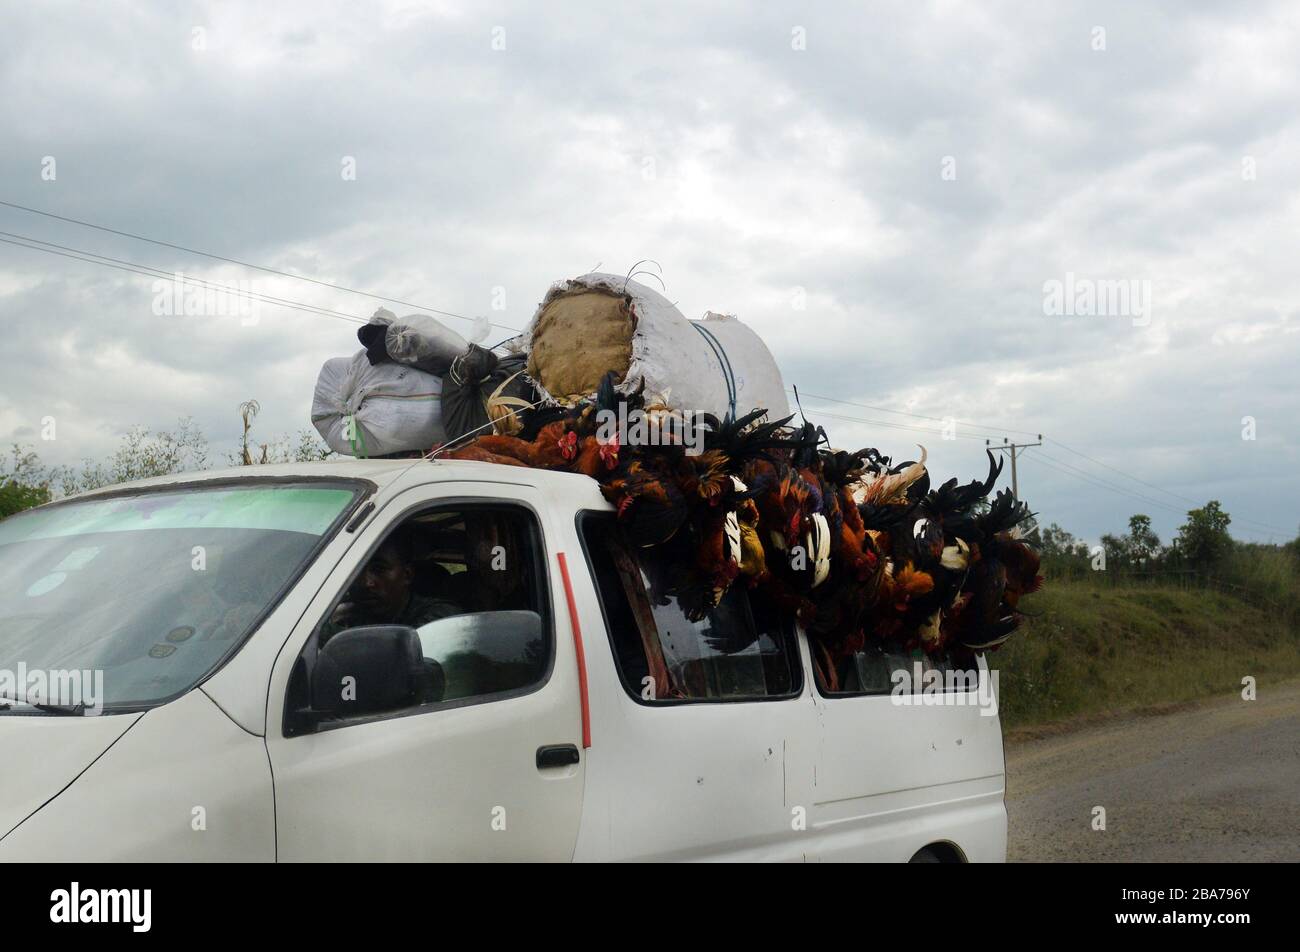 Transporting live chickens on top of a bush taxi in the Oromia region of Ethiopia. Stock Photo